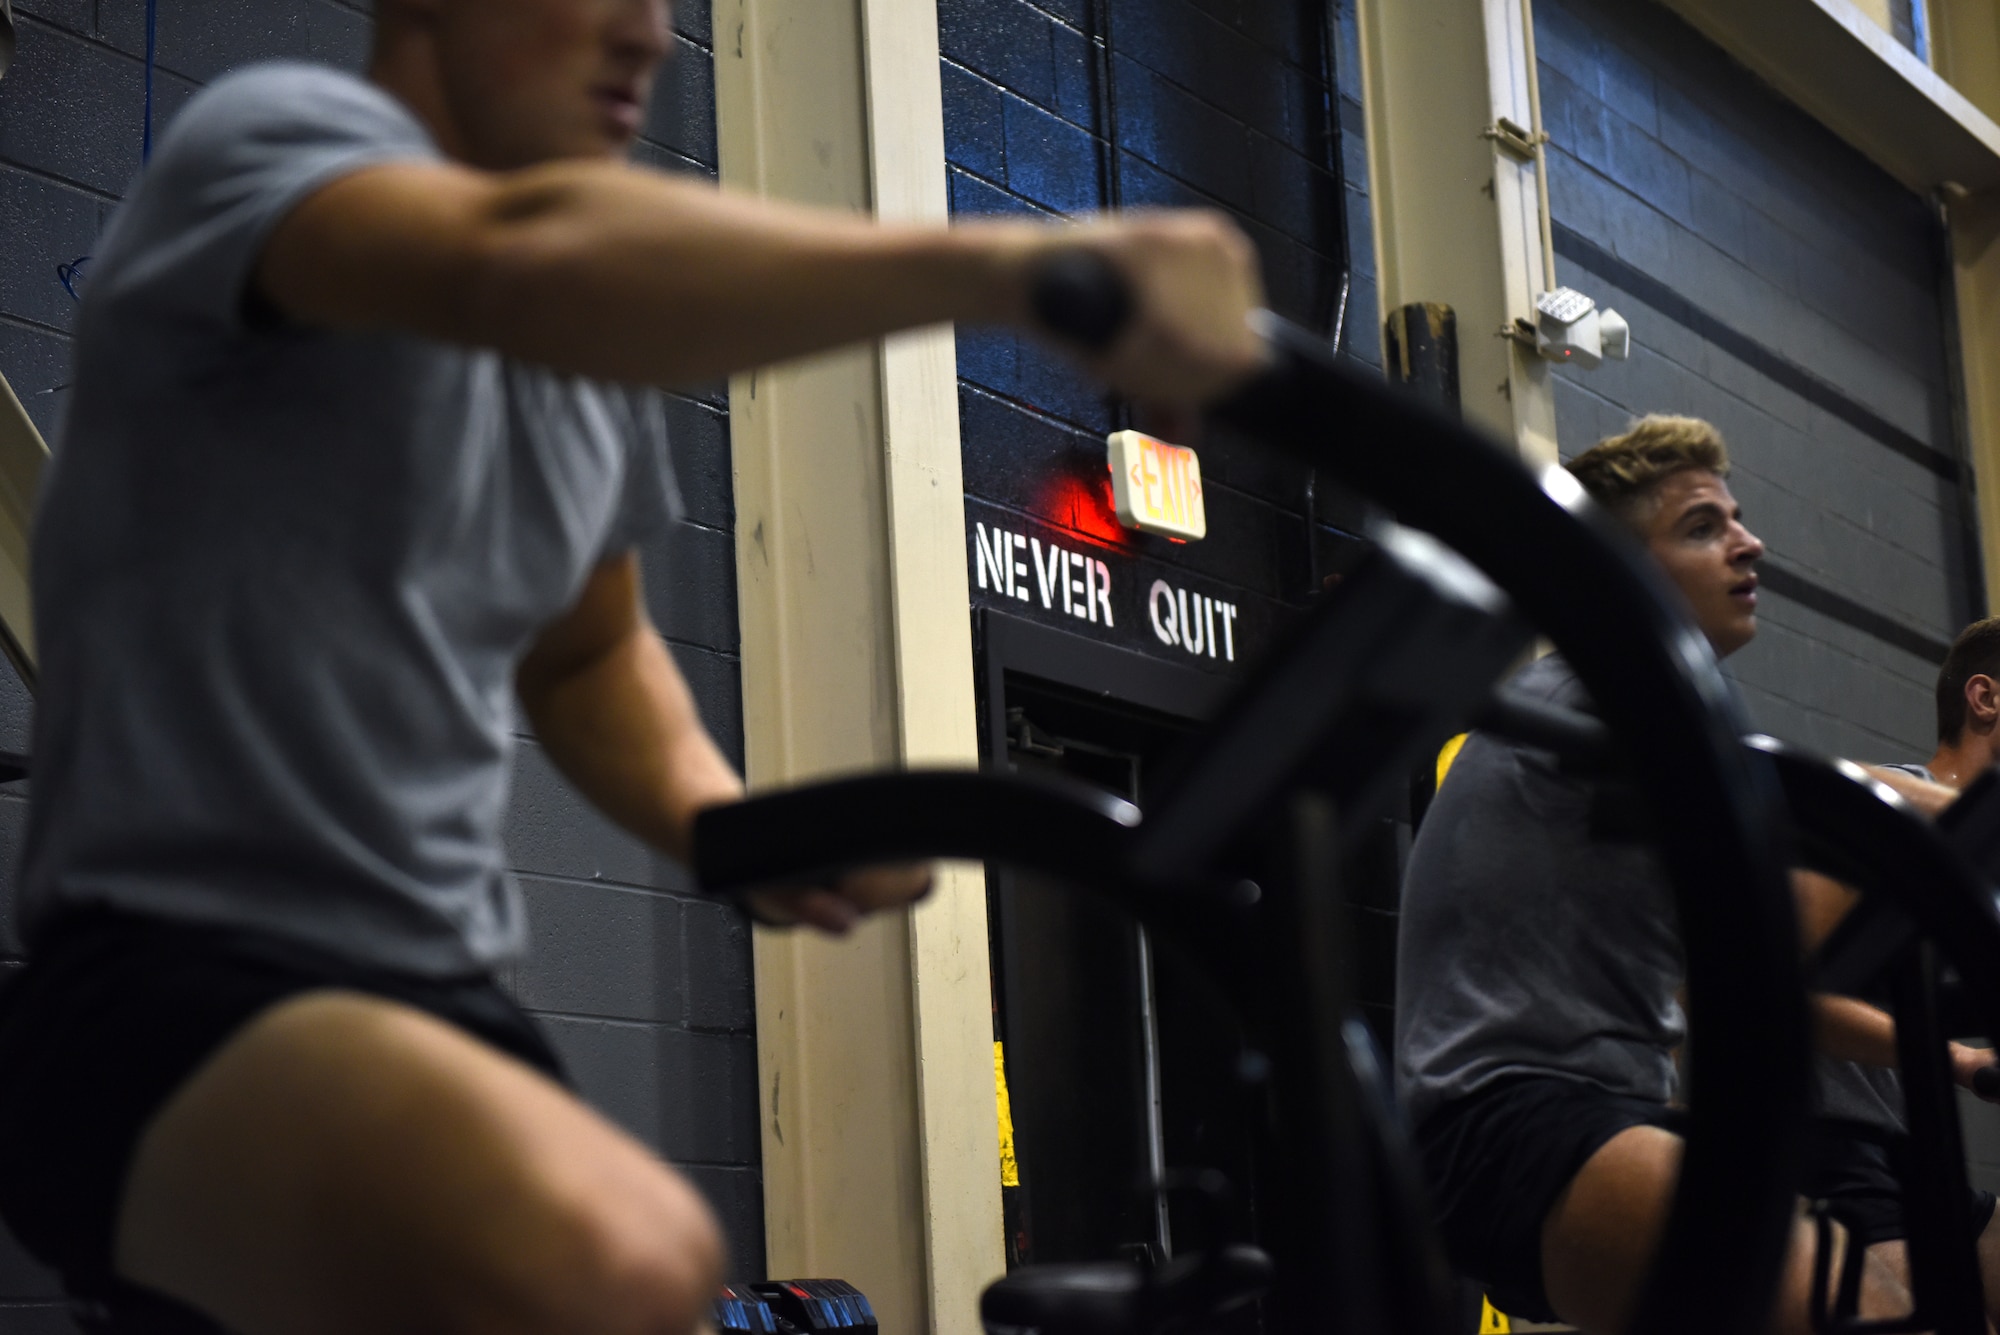 Airmen from the 352nd Special Warfare Training Squadron exercise on workout bikes at Matero Hall on Keesler Air Force Base, Mississippi, Aug. 22, 2019. Special Warfare trainees partake in intense physical training sessions to prepare them for combat. (U.S. Air Force photo by Airman Seth Haddix)